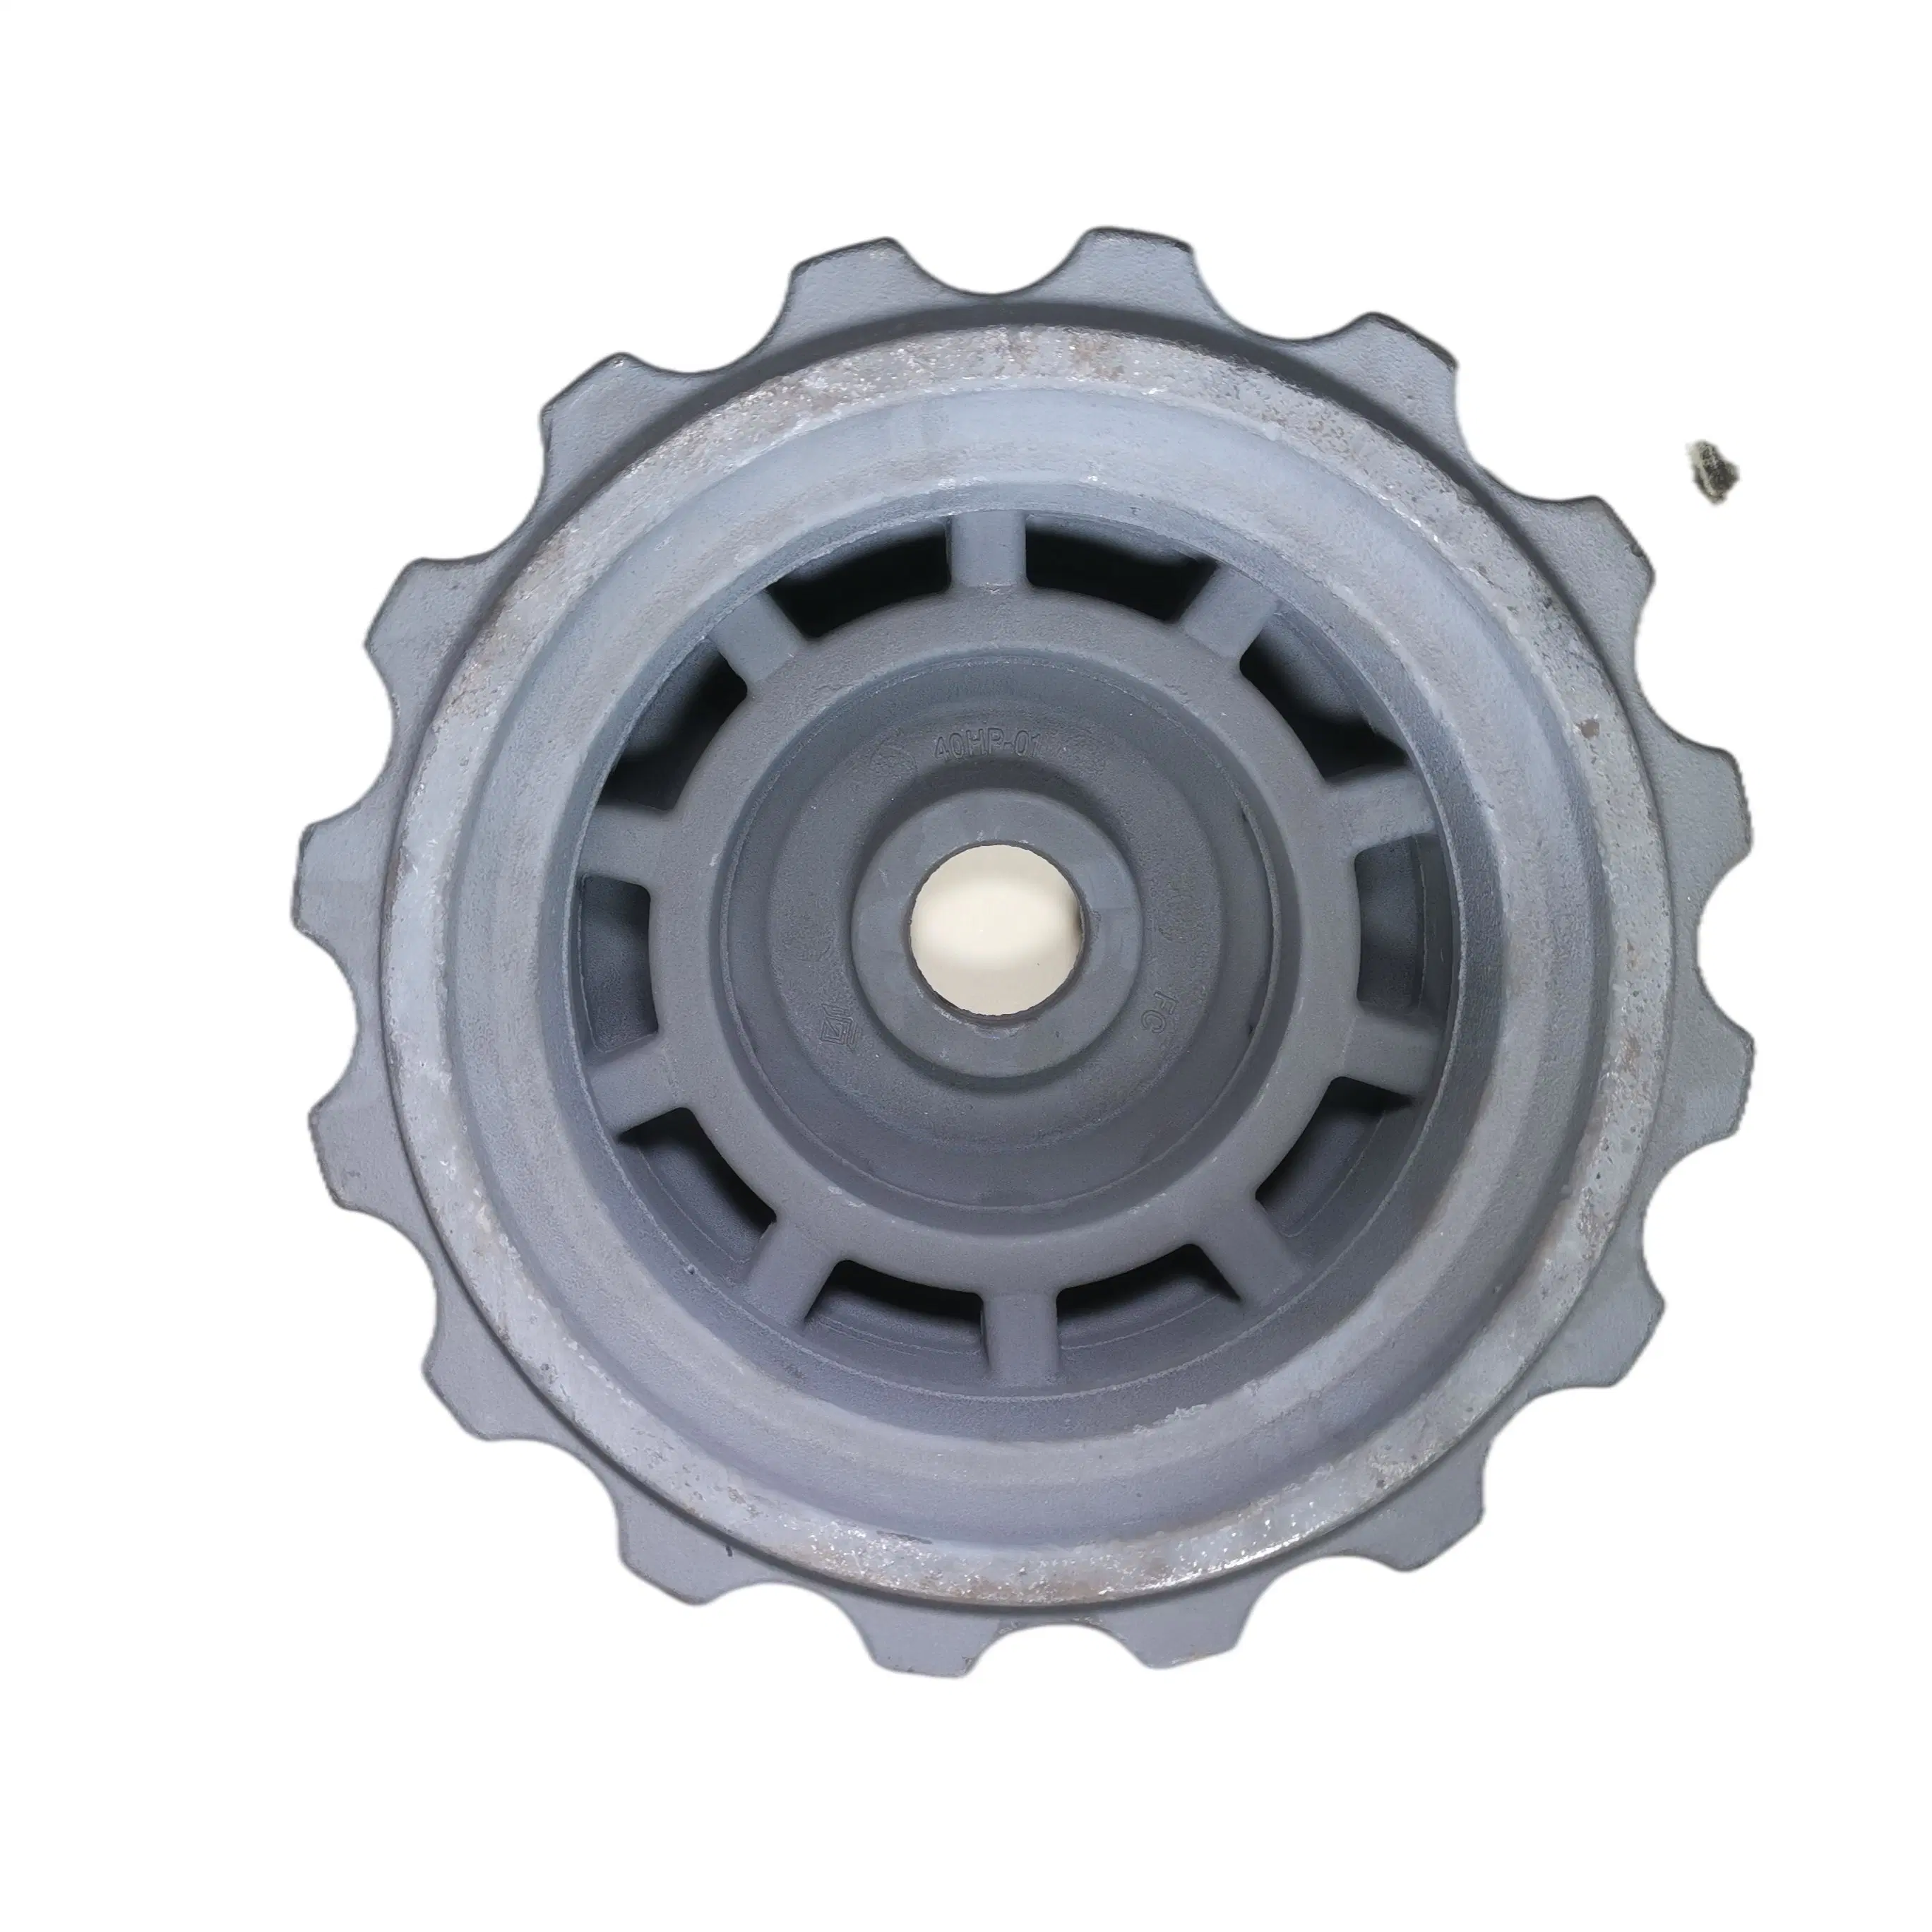 Chassis Parts, Gear Plate, Automobile, Qt, Casting Iron